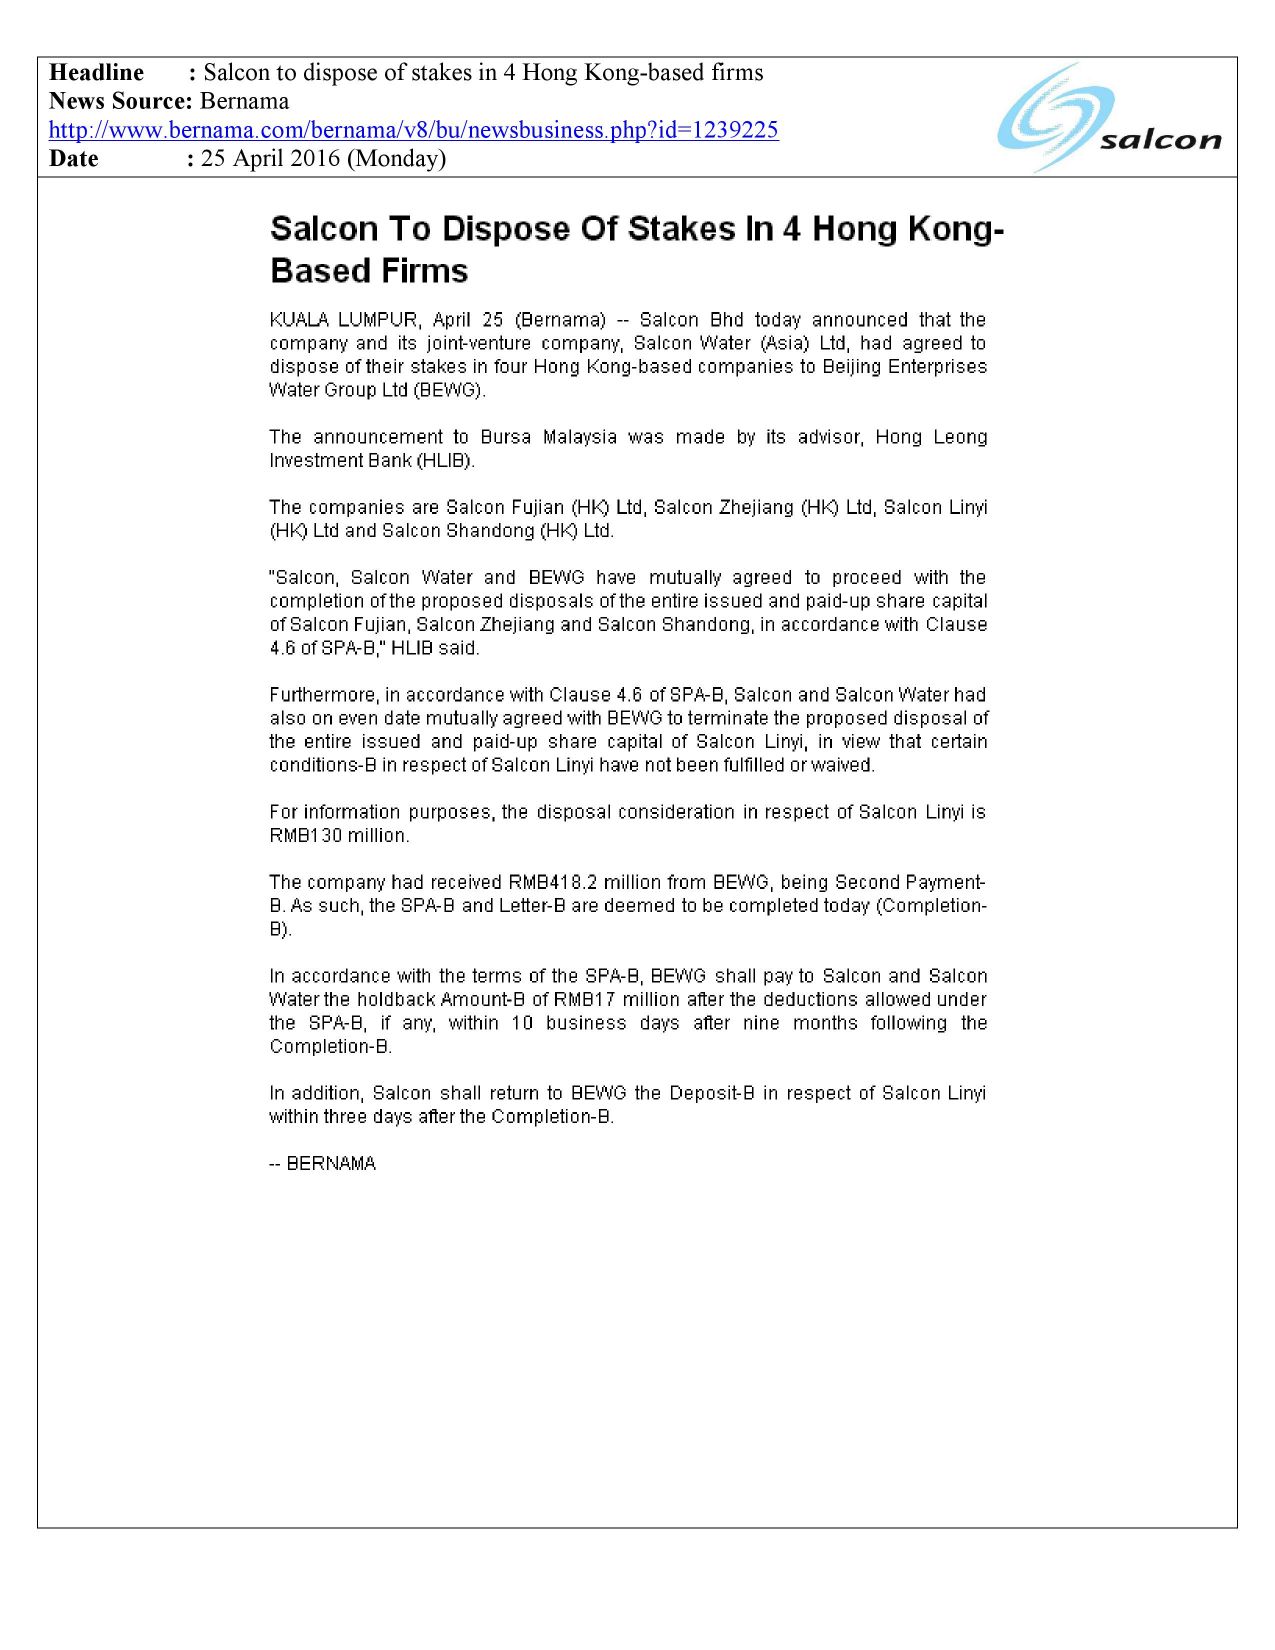 Salcon to dispose of stakes in 4 Hong Kong-based firms